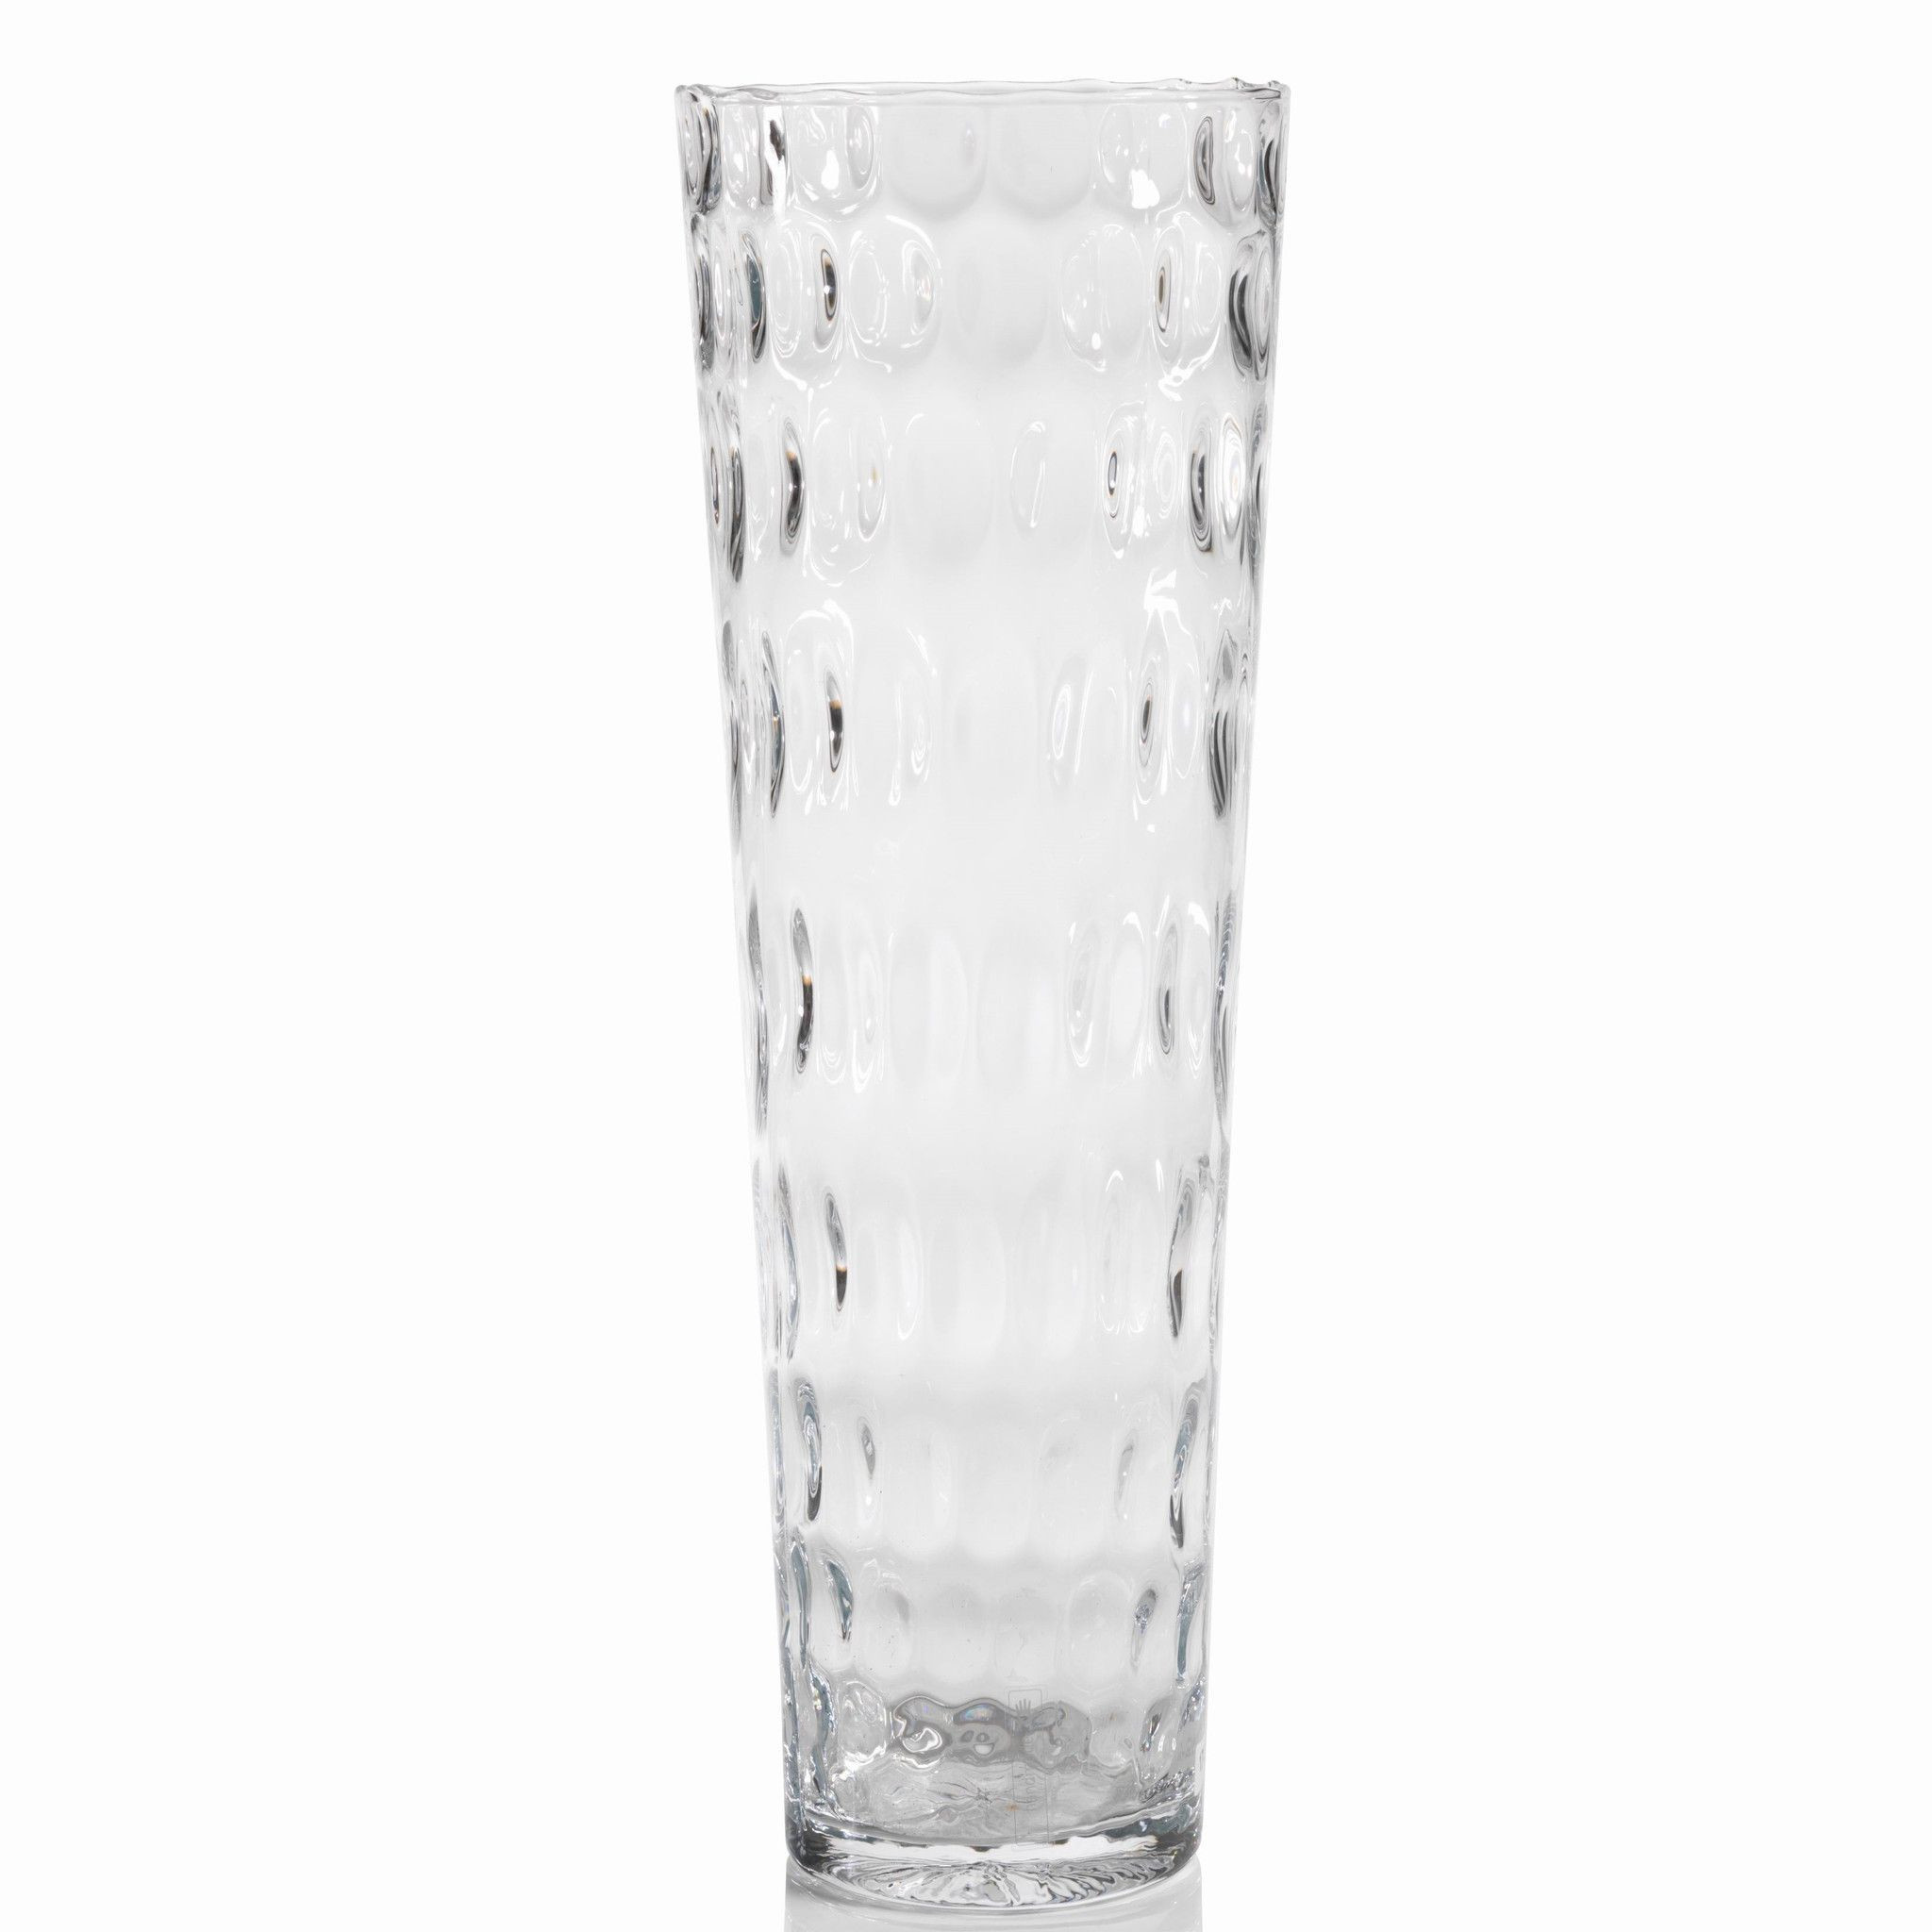 13 attractive 9 Clear Glass Cylinder Vase 2024 free download 9 clear glass cylinder vase of confetti glass vase short carlyle avenue 2 carlyle avenue with regard to confetti glass vase short carlyle avenue 2 carlyle avenue home decor pinterest confett